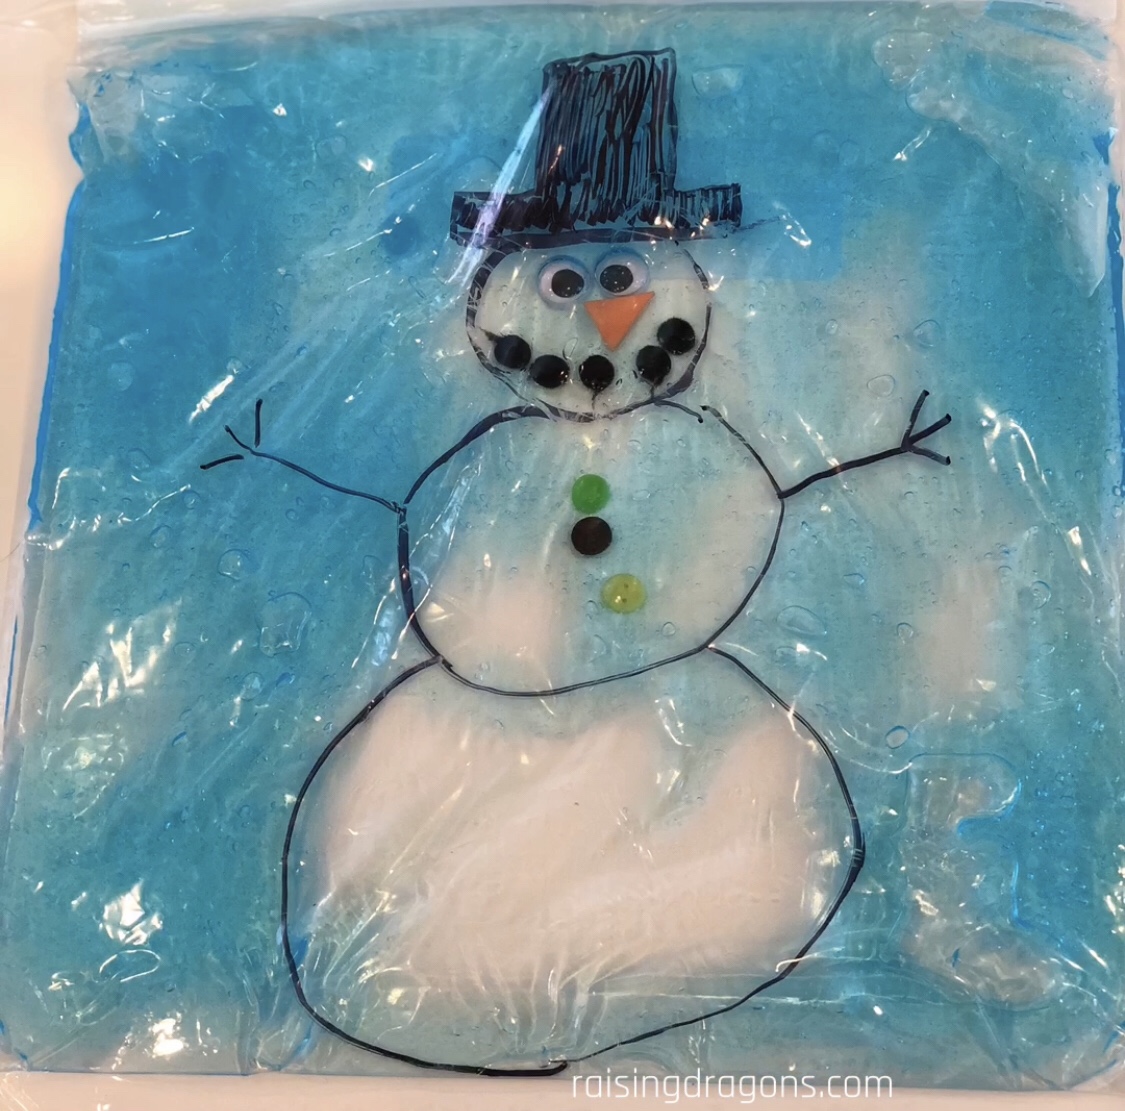 Snowman Sensory Table & How to Color Chickpeas Tutorial - Pocket